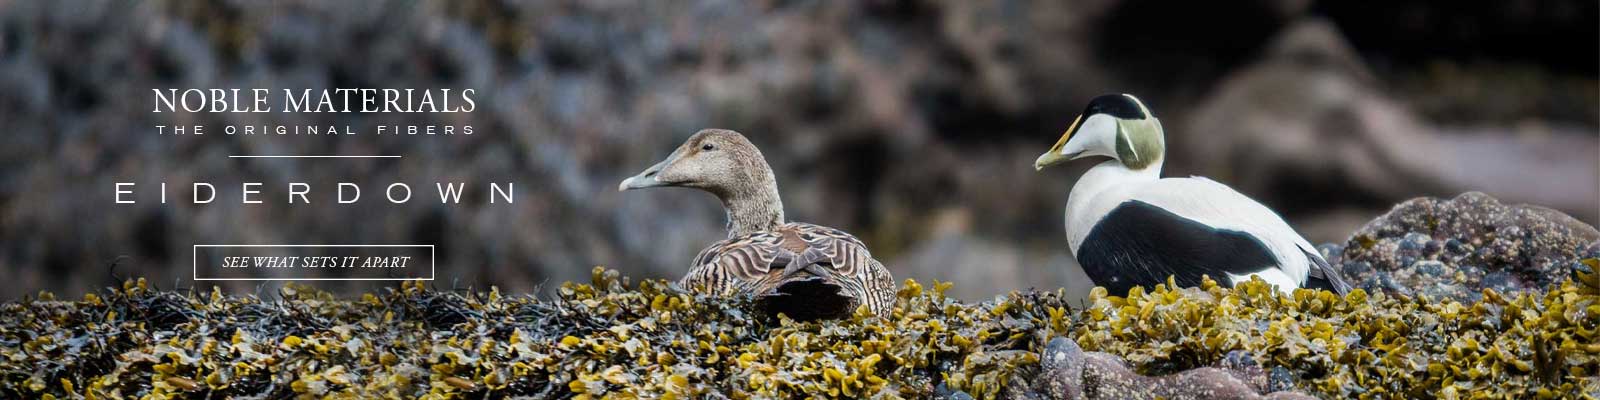 The Eider duck is the source of eiderdown, one of the original fibers, one of the finest, luxury down materials.